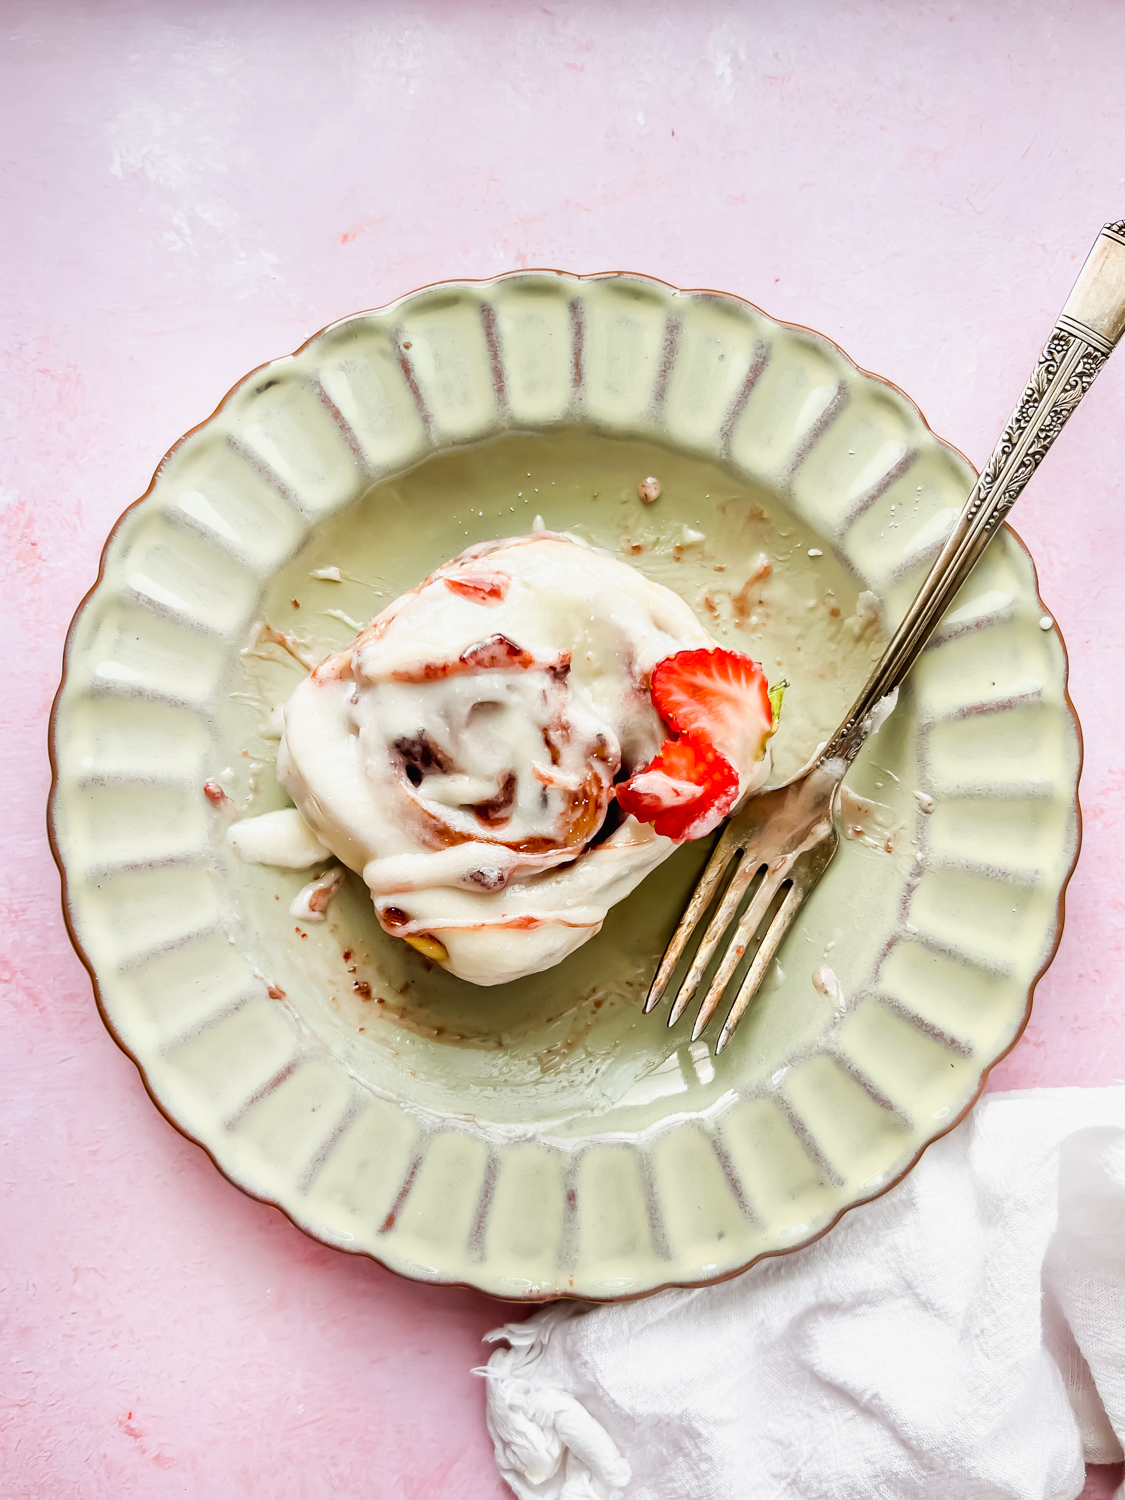 One glazed strawberry cinnamon roll on antique plate garnished with fresh strawberry slices.